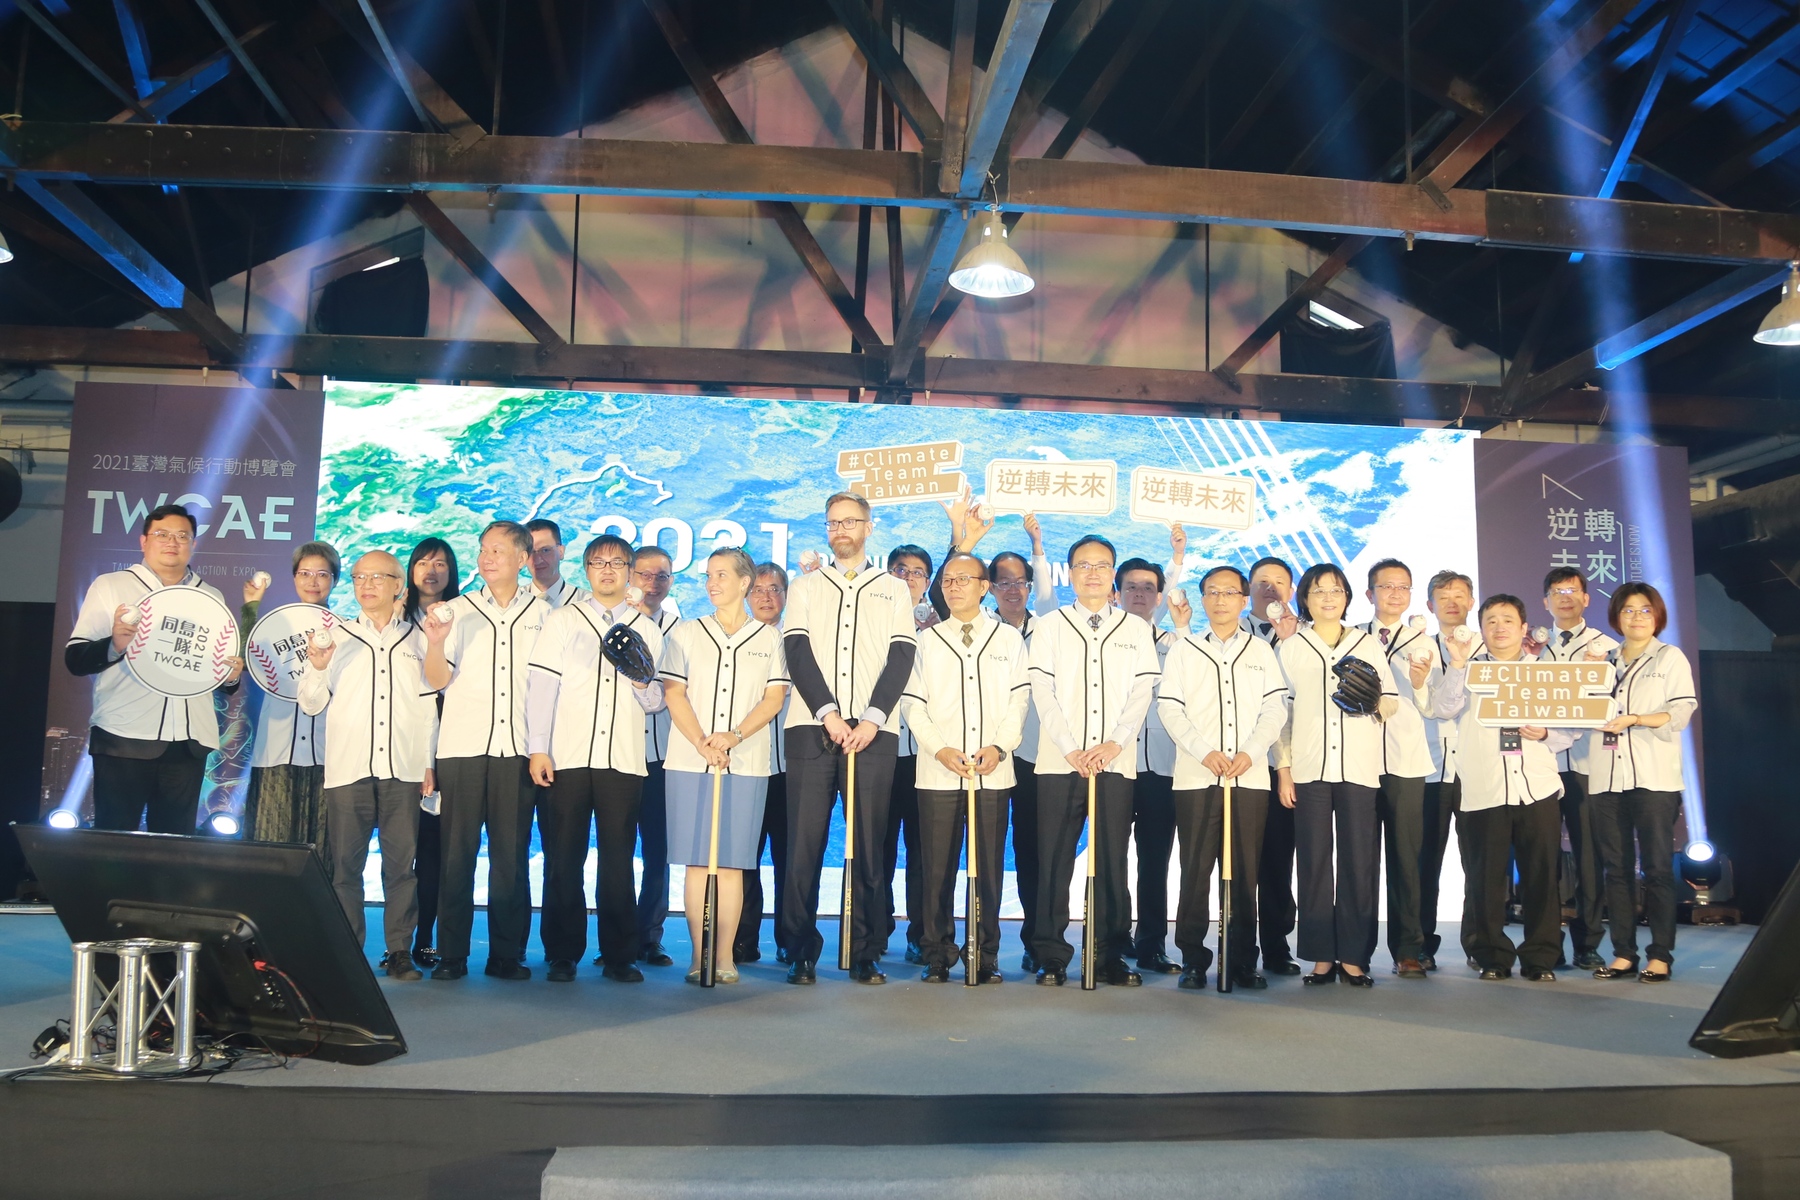 The three-day Taiwan Climate Action Exposition 2021 was organized in Pier-2 Art Center in Kaohsiung.